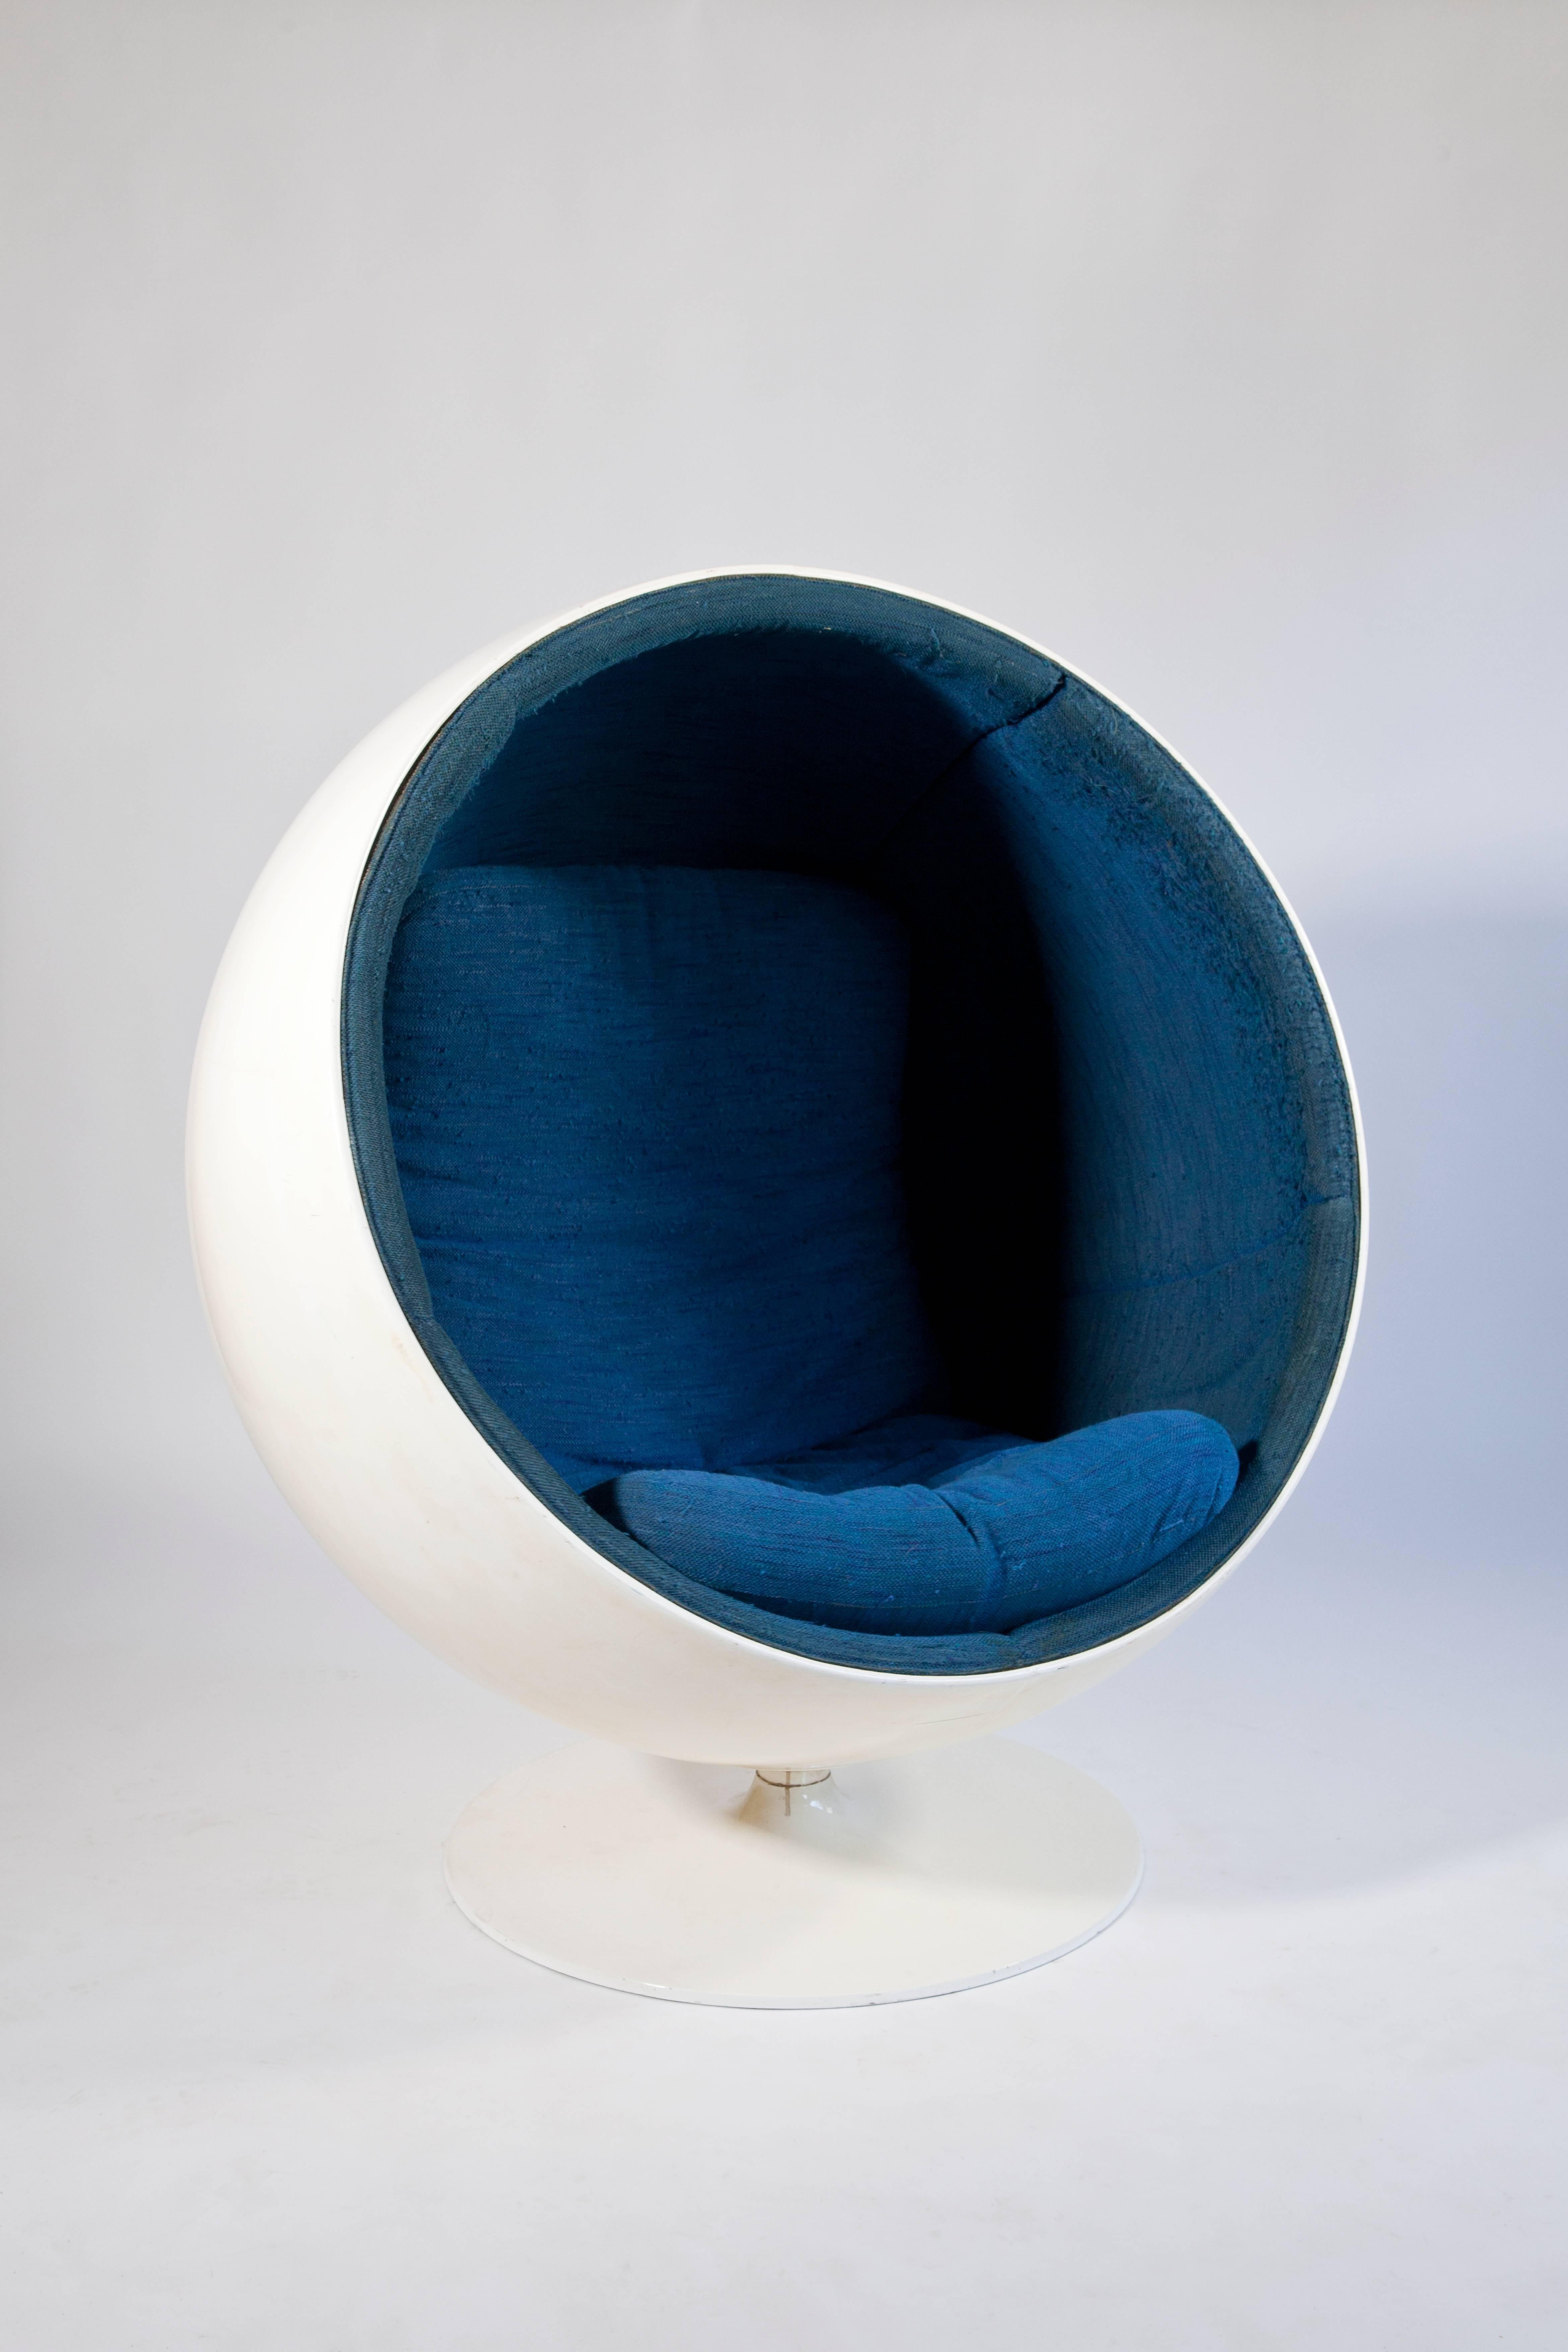 Mid-20th Century Original Vintage 'Ball Chair' Designed by Eero Aarnio in 1963 For Sale